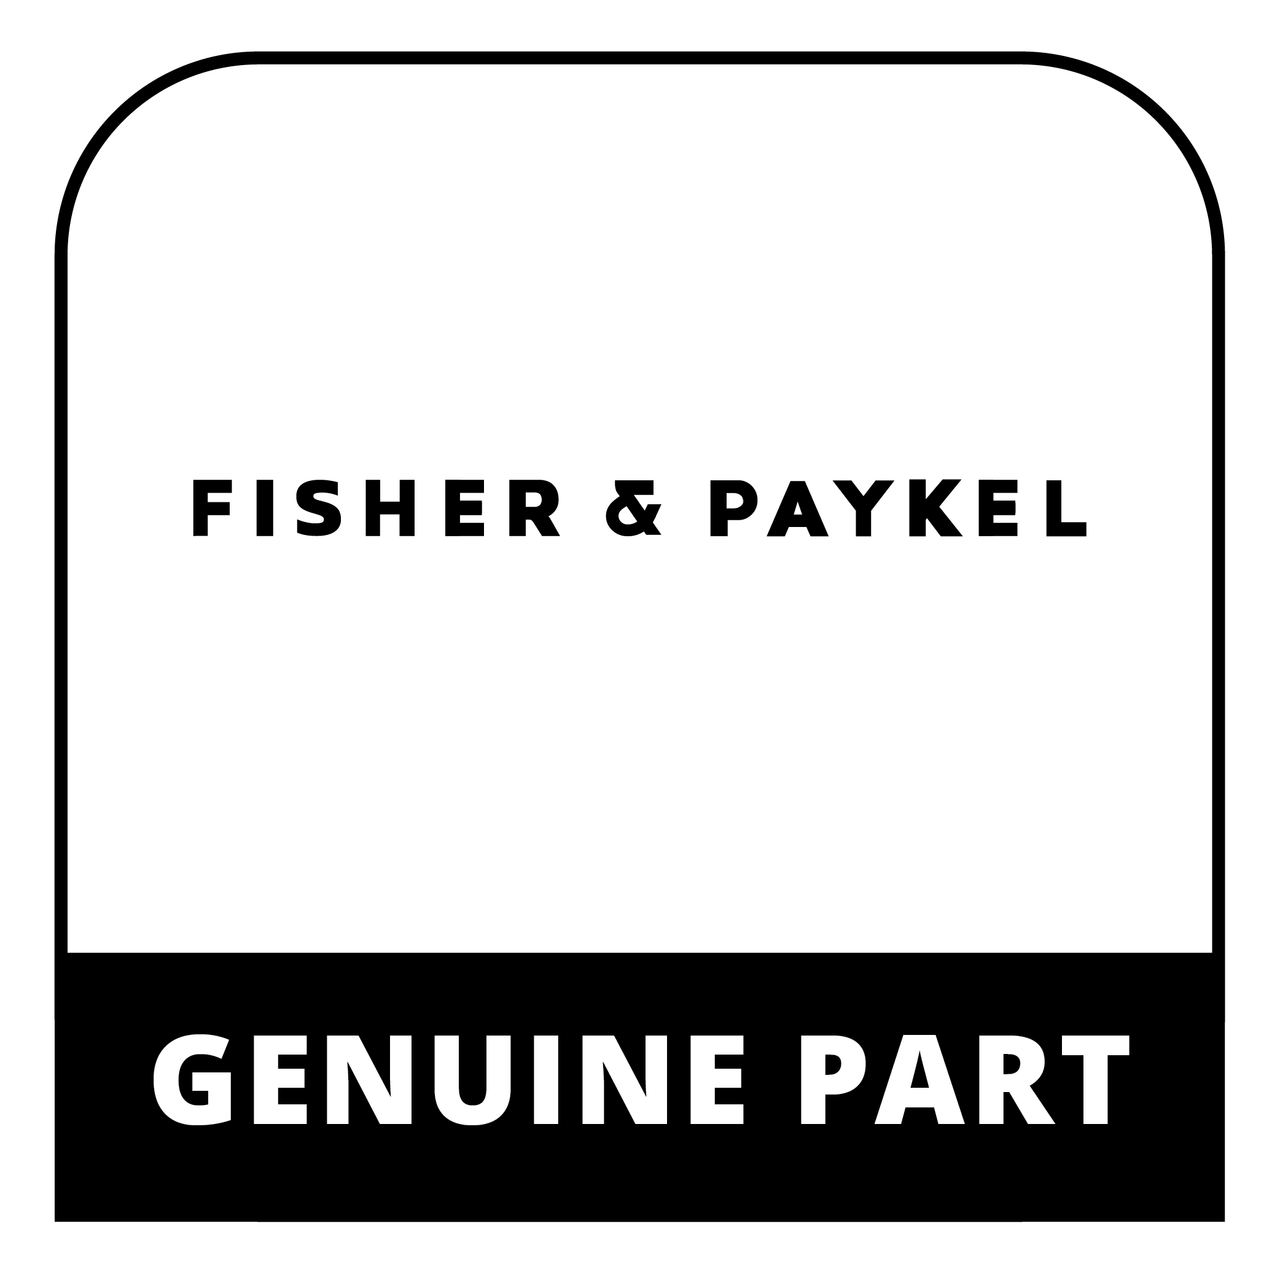 Fisher & Paykel 210030 - Box Dcs 132 - Genuine Fisher & Paykel (DCS) Part